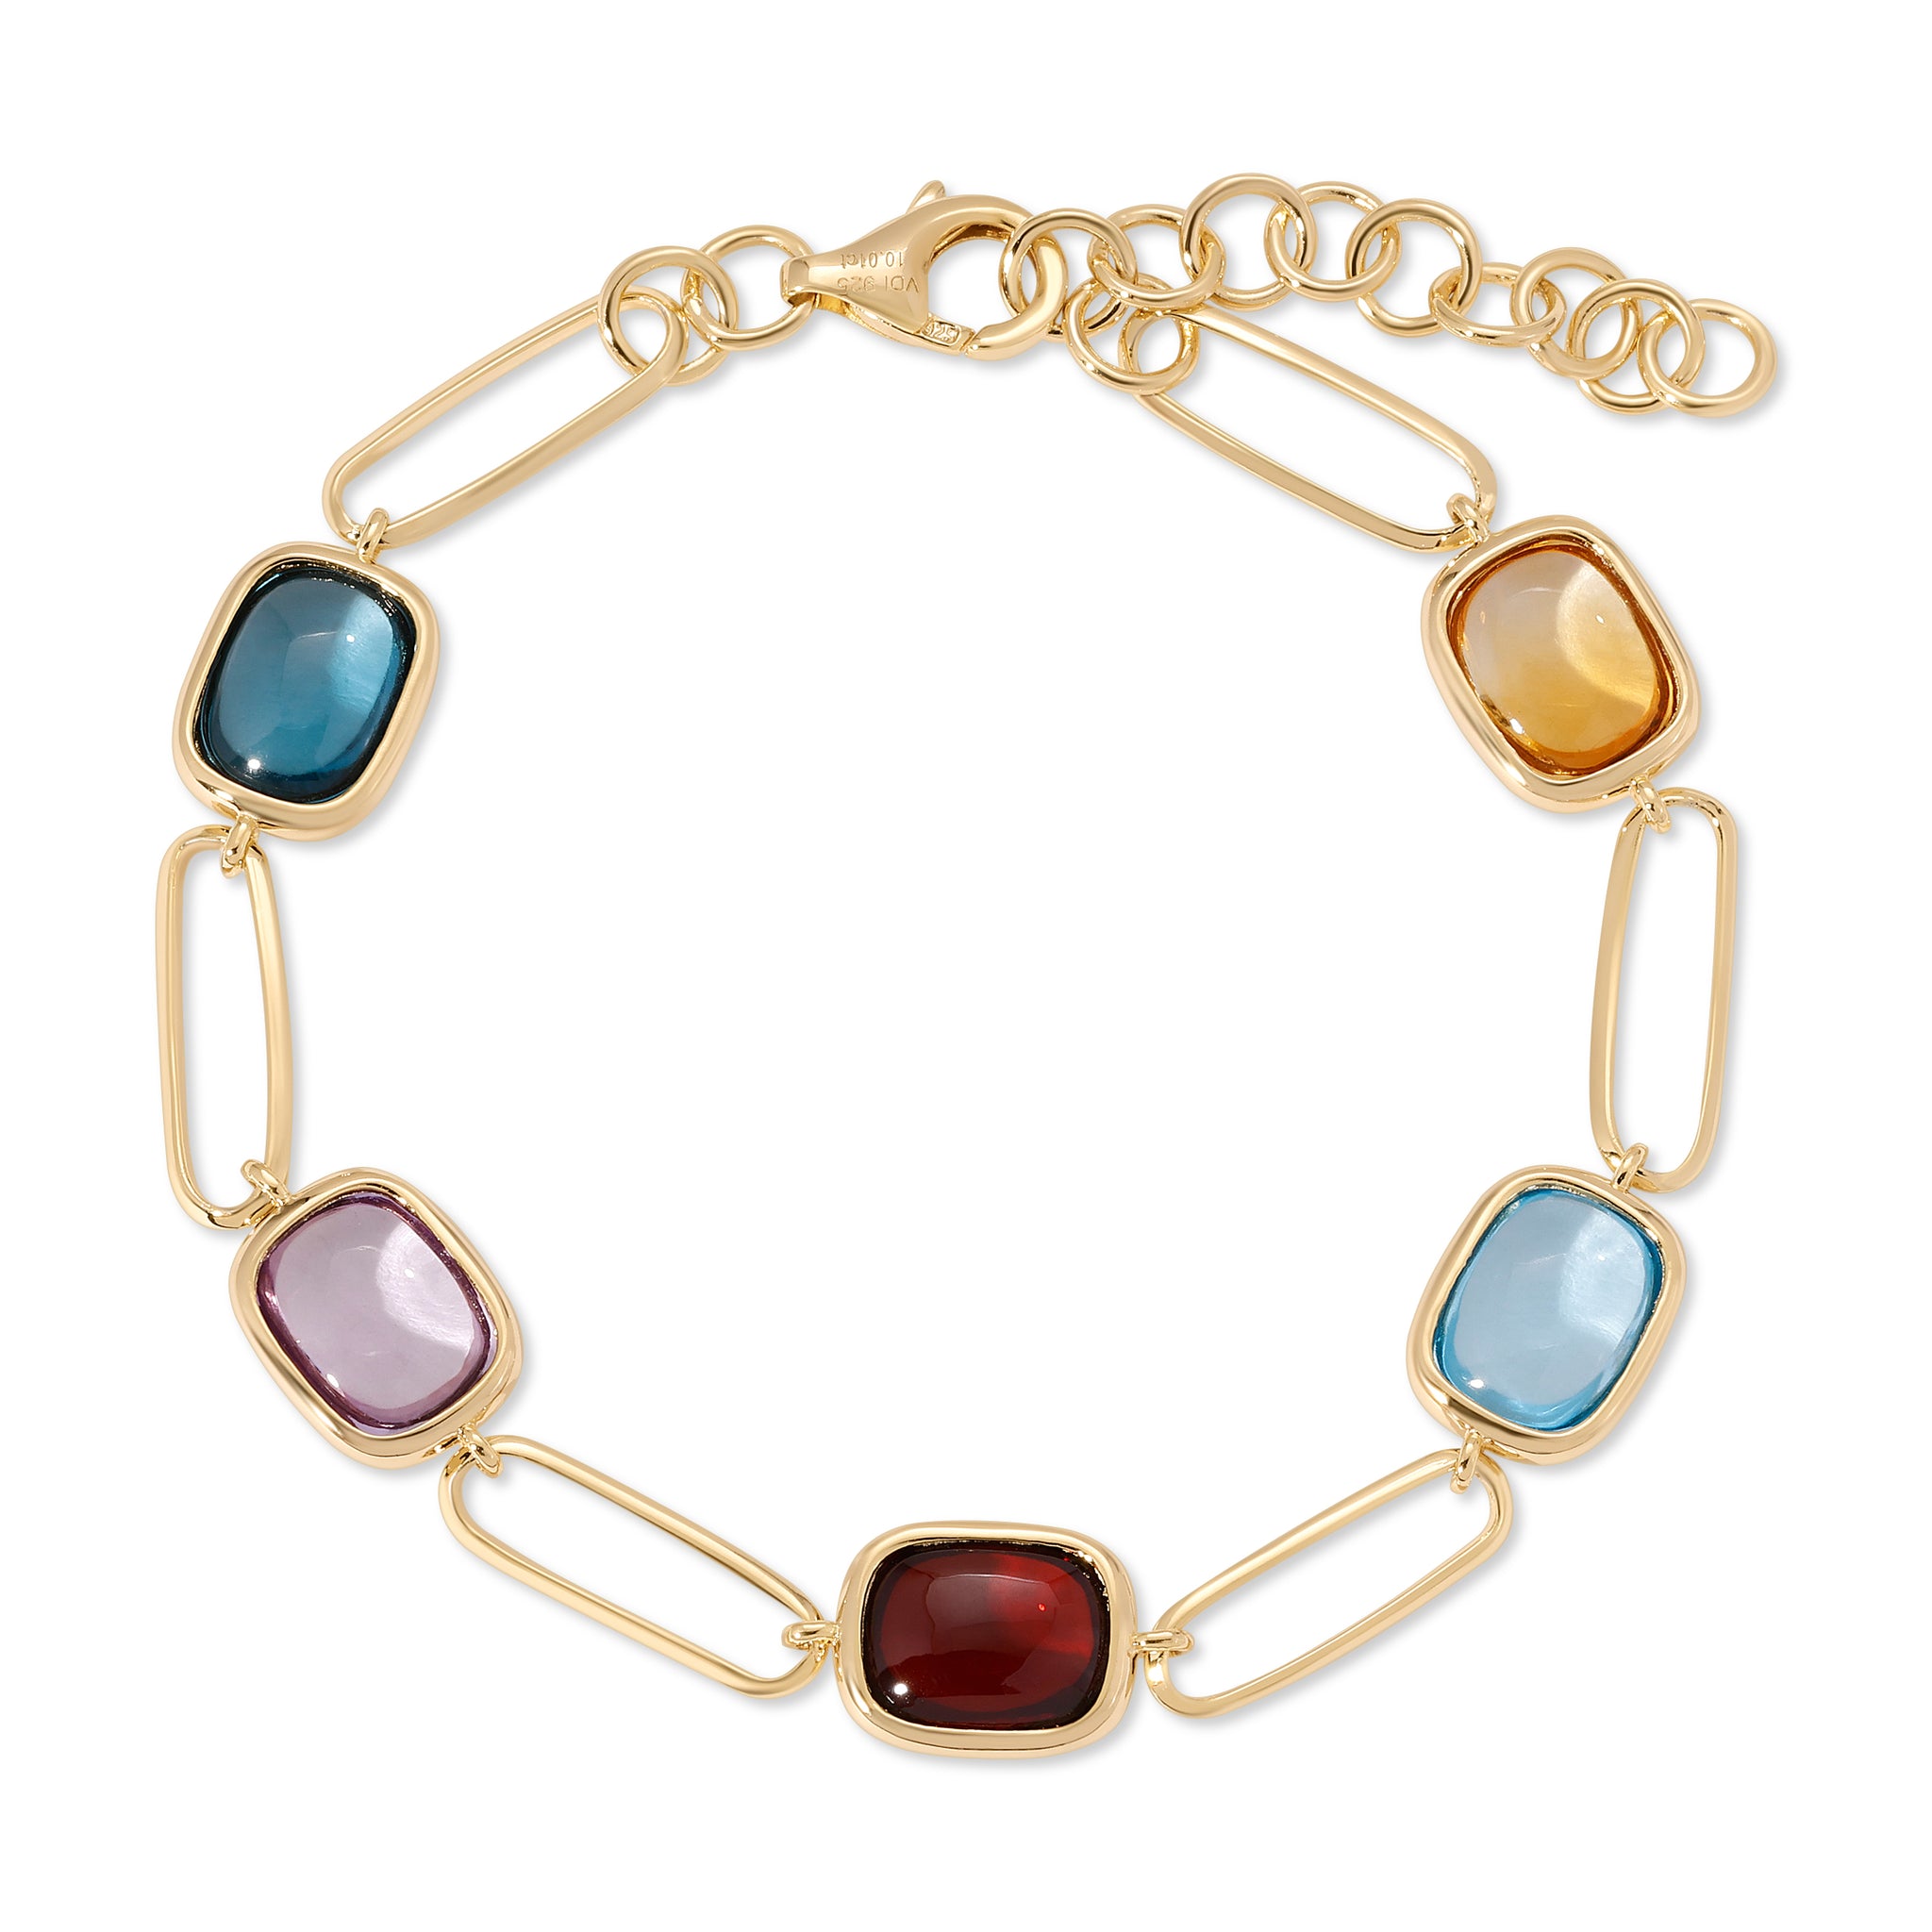 Color Candy Collection Bracelet 14.24 ctw with 6 Cushion Shape Multi Gemstone on 6.332 gr Gold Plated Silver